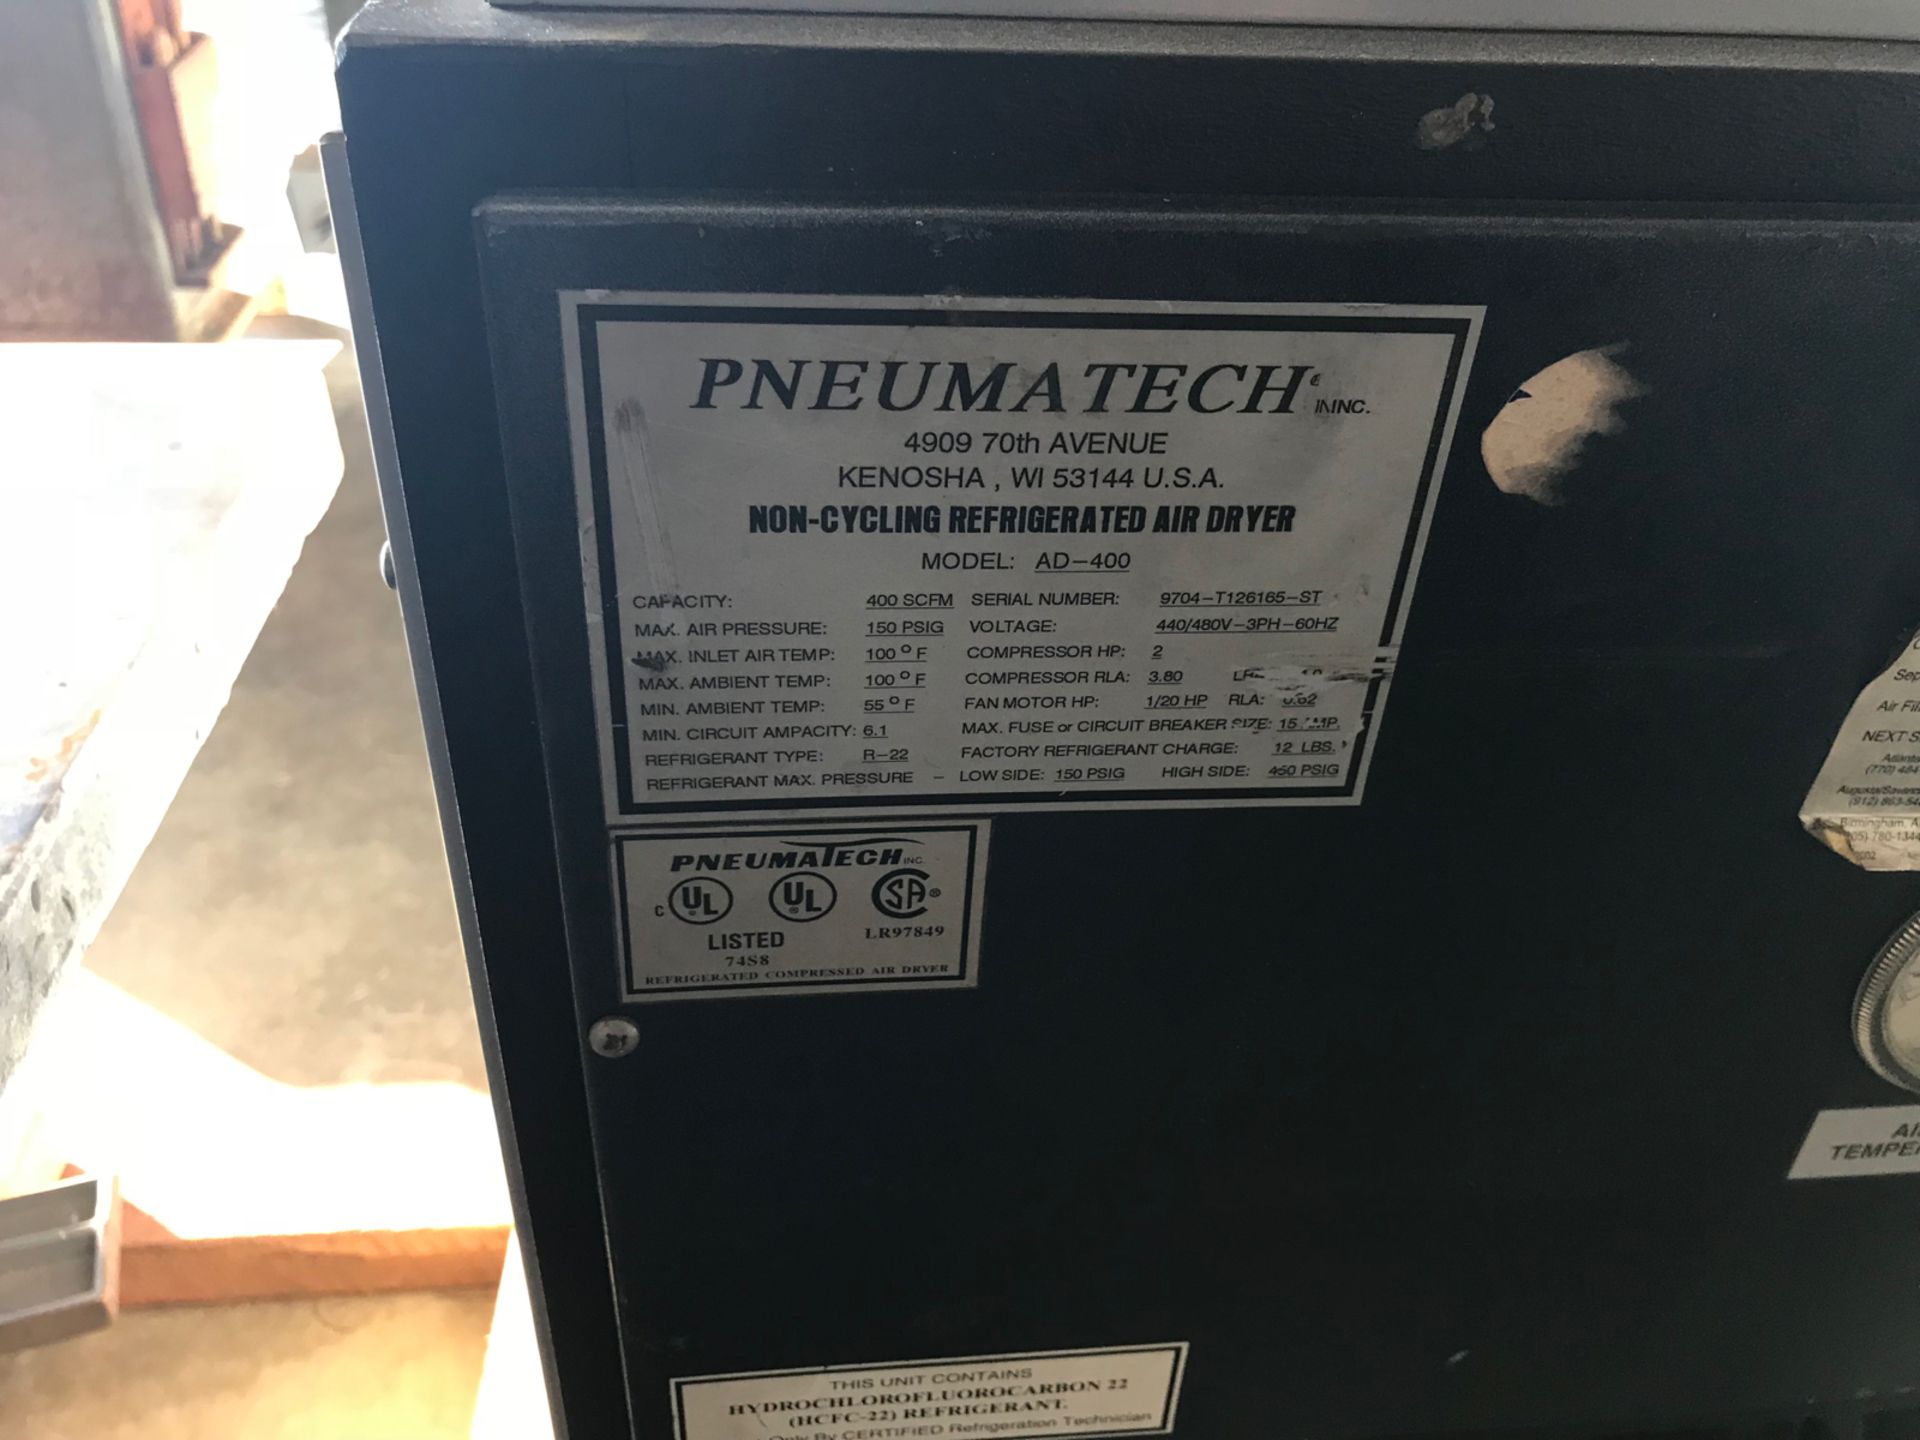 (8121) Pneumatech Non Cycling refrigerated Model #Ad-399 - Image 2 of 3